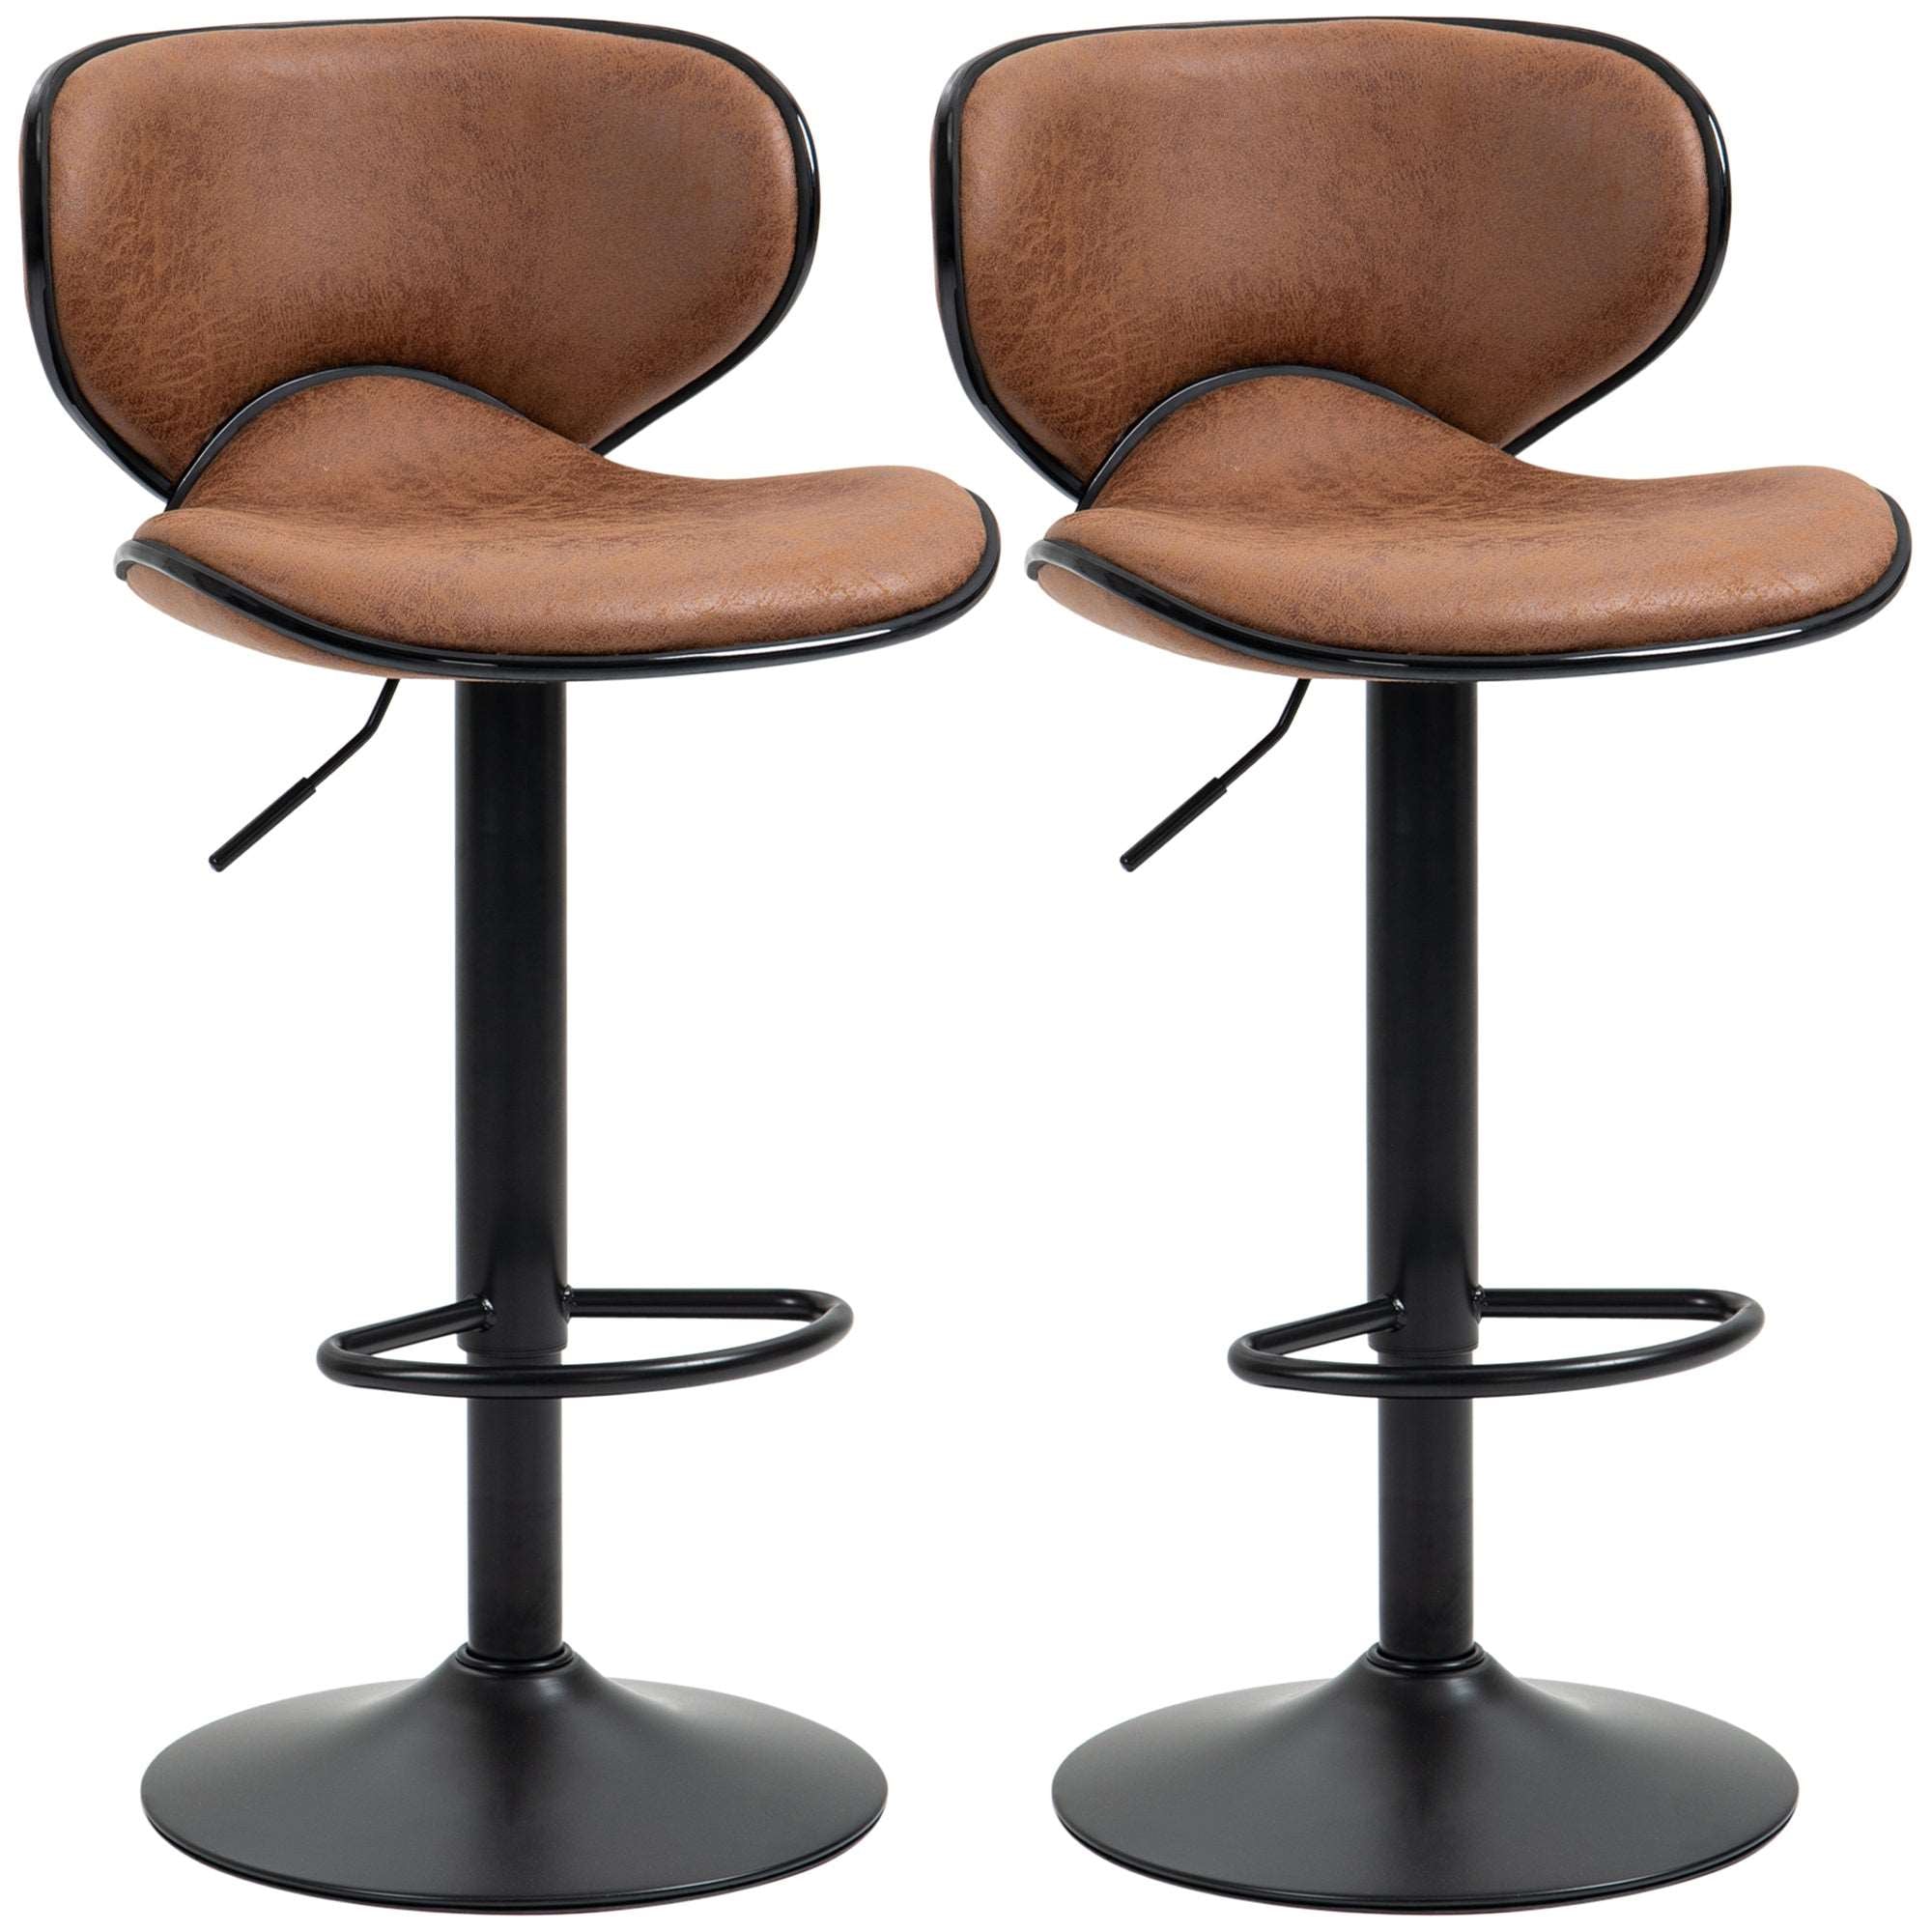 Bar Stool Set of 2 Microfiber Cloth Adjustable Height Armless Chairs with Swivel Seat, Brown  AOSOM   